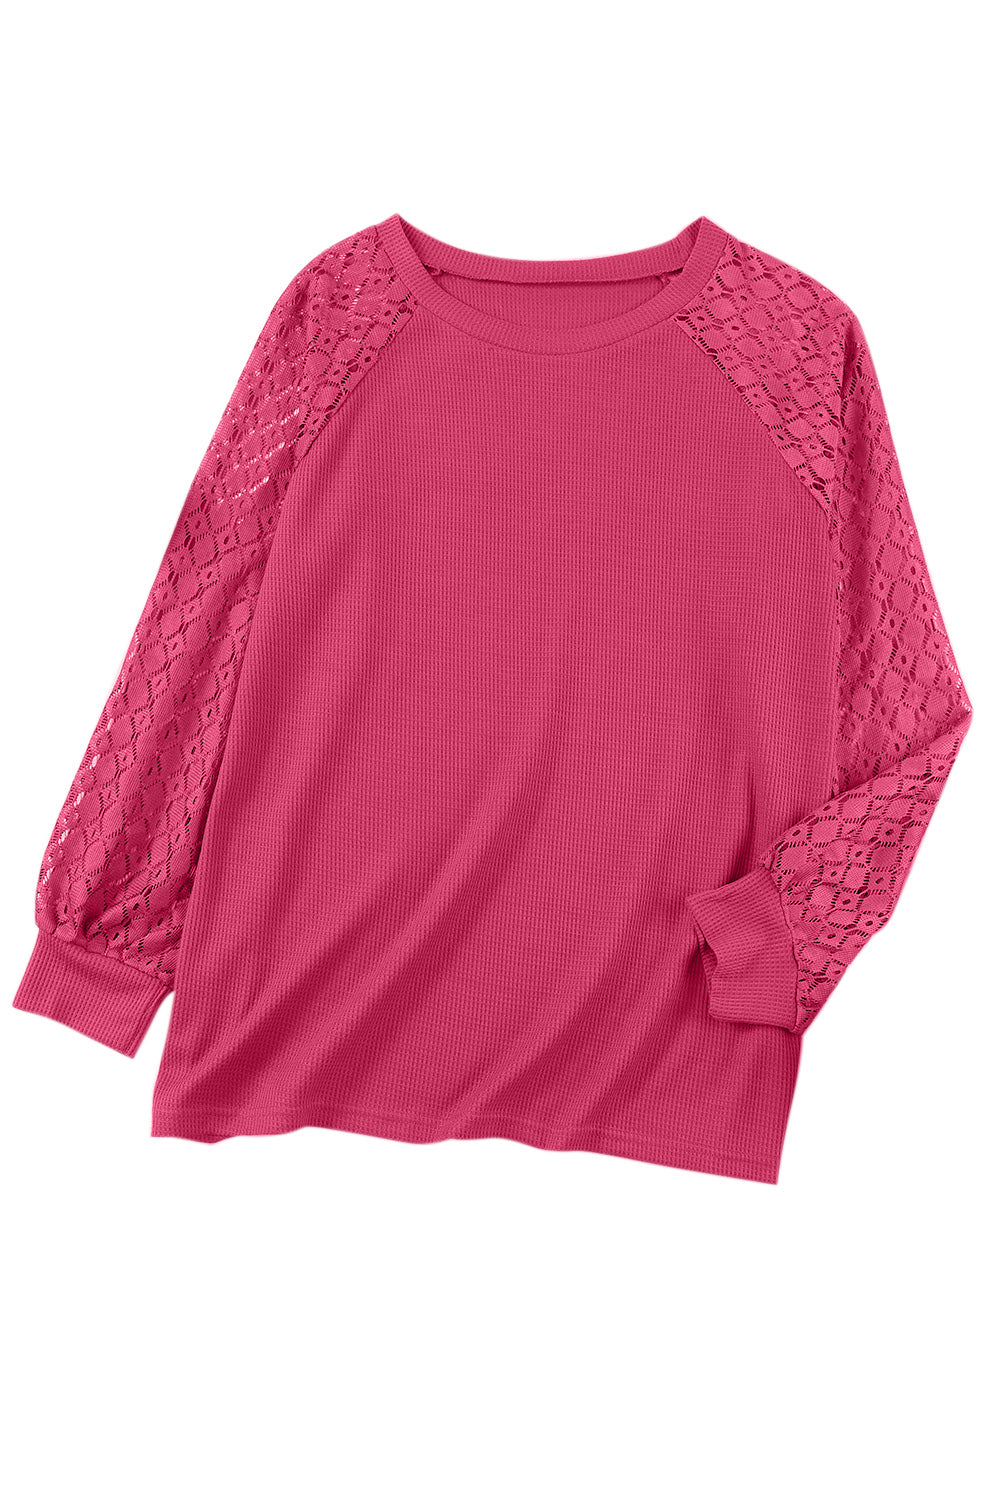 Strawberry Pink Plus Size Contrast Lace Sleeve Waffle Knit Top Pre Order Plus Size JT's Designer Fashion